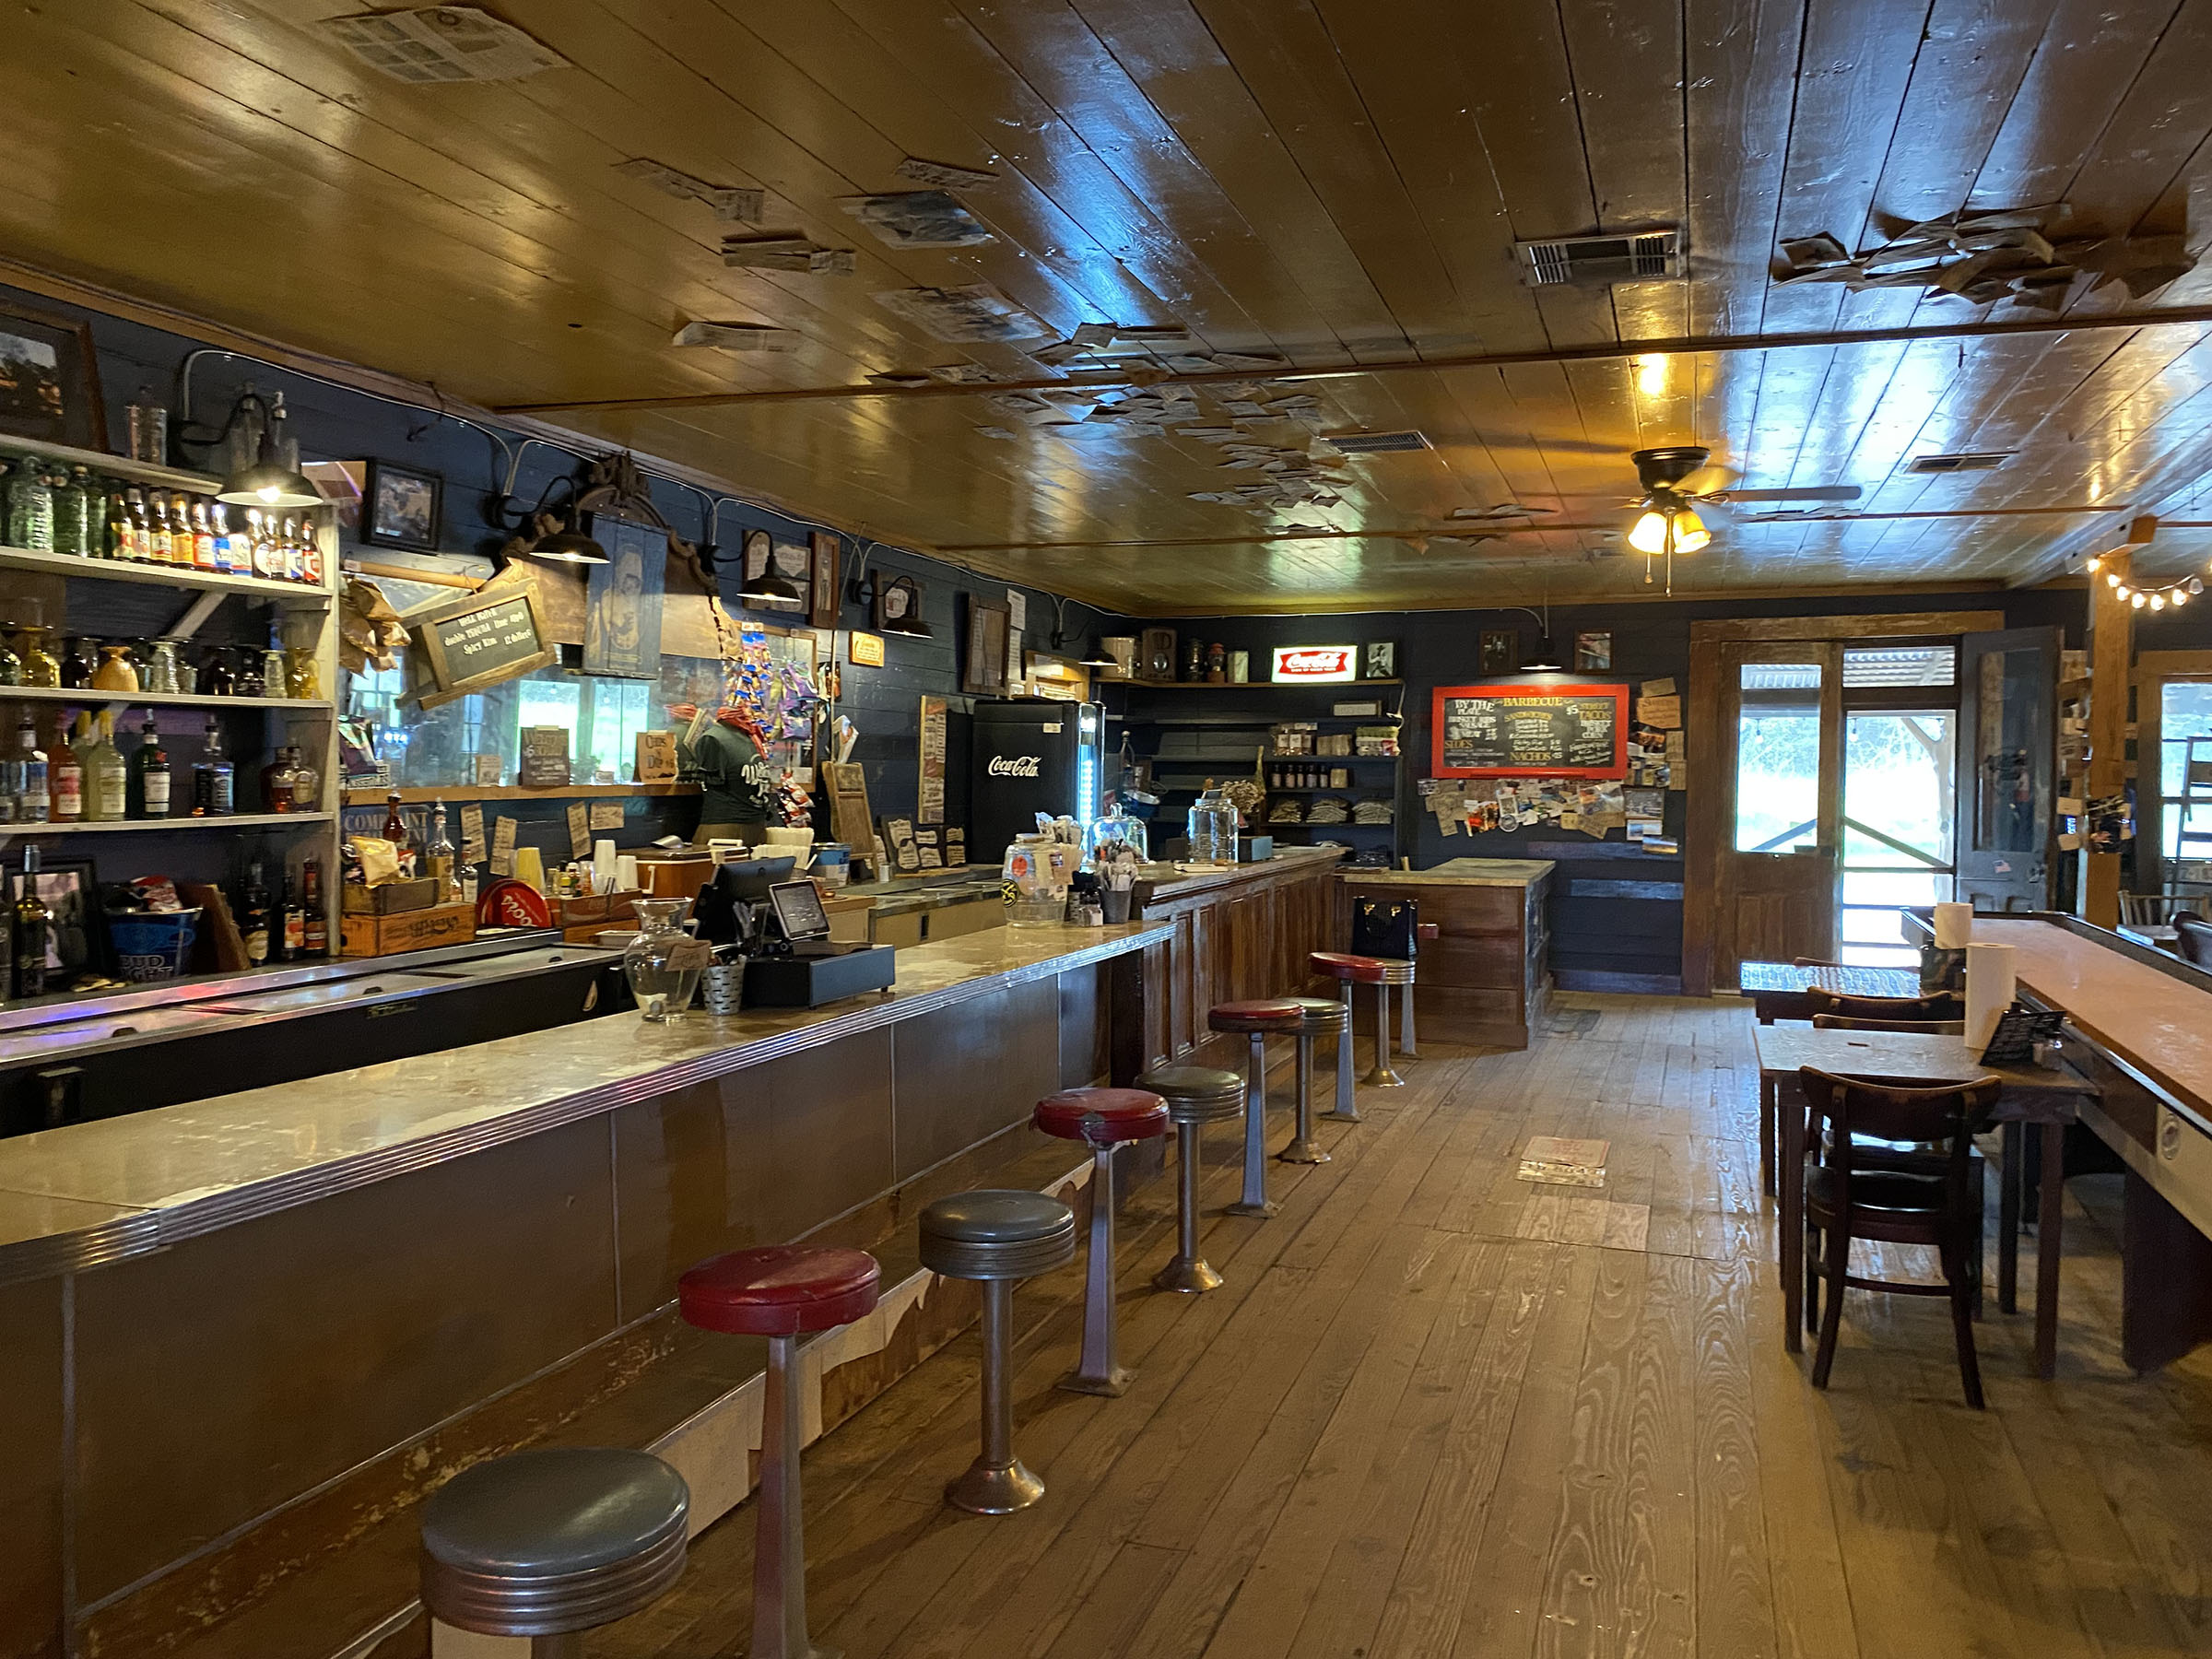 The interior of Welcome General Store shows an extended bar with bar stools, neon signs, and freshly restored wood floors. 